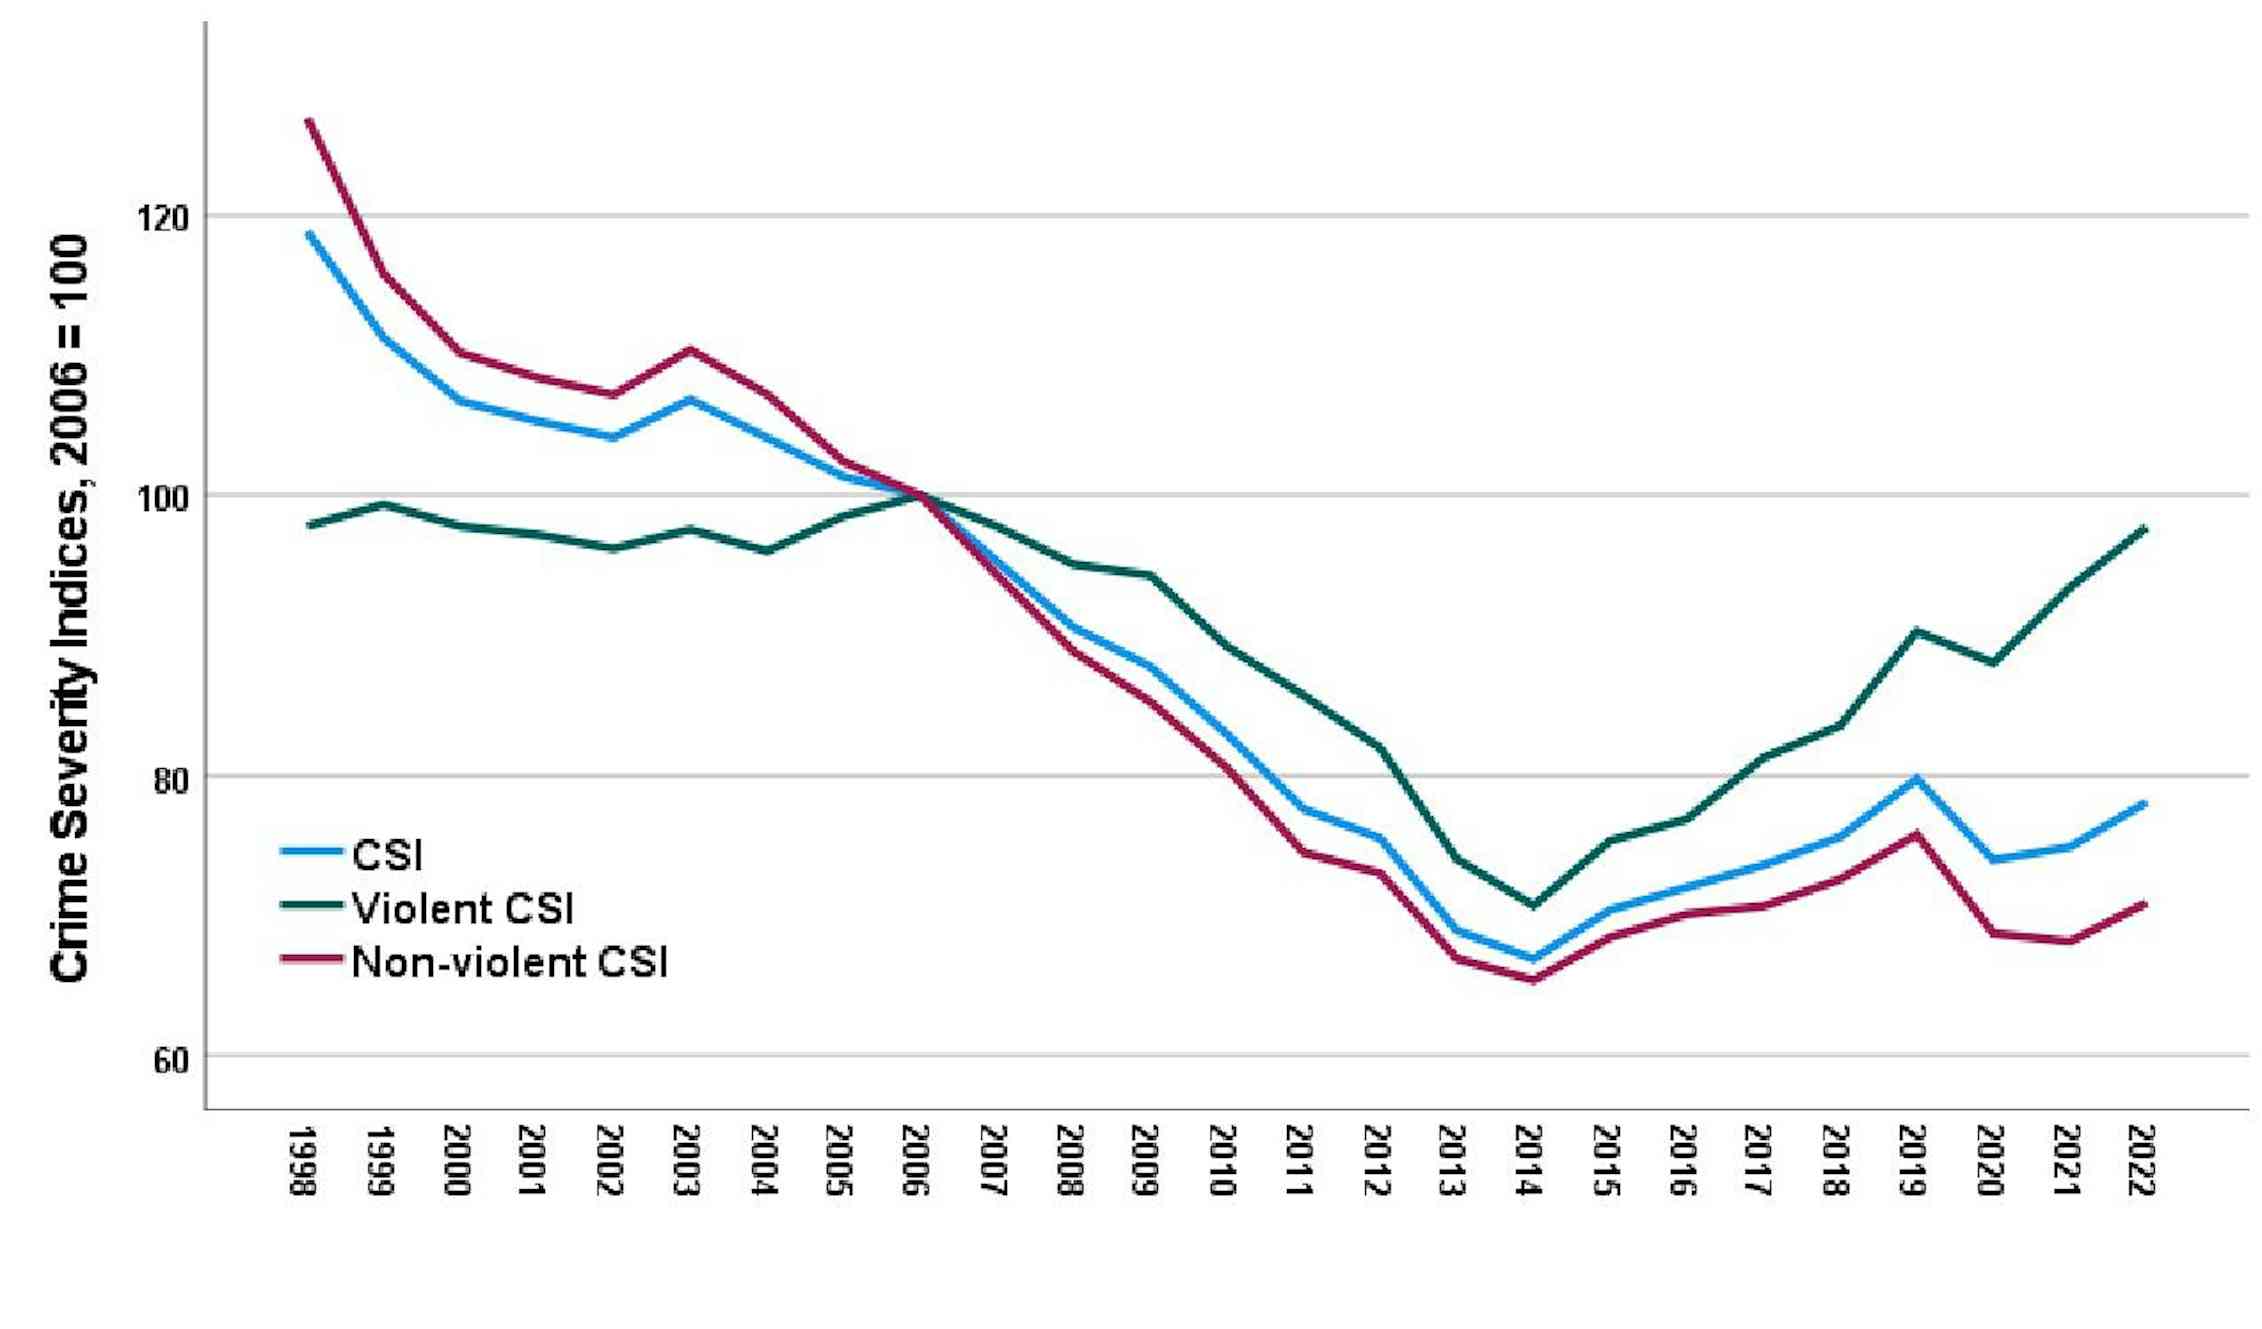 A graph showing Canada's crime severity index between 1998 and 2022. The graph shows a decrease until 2014 followed by a slight increase in subsequent years.